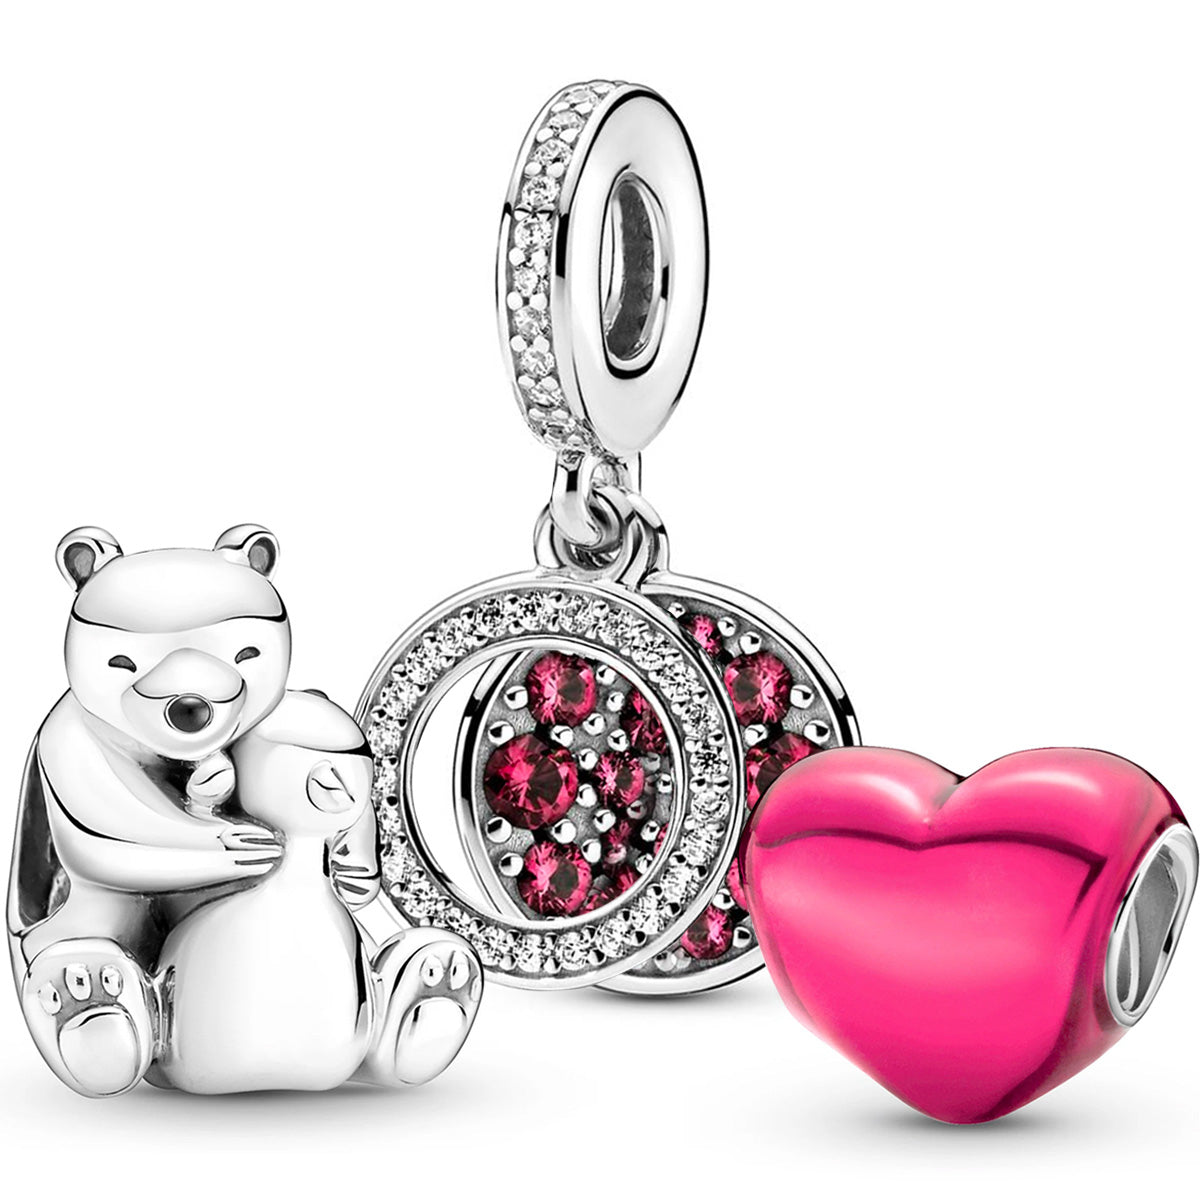 "I Love You Beary Much" Charm Set